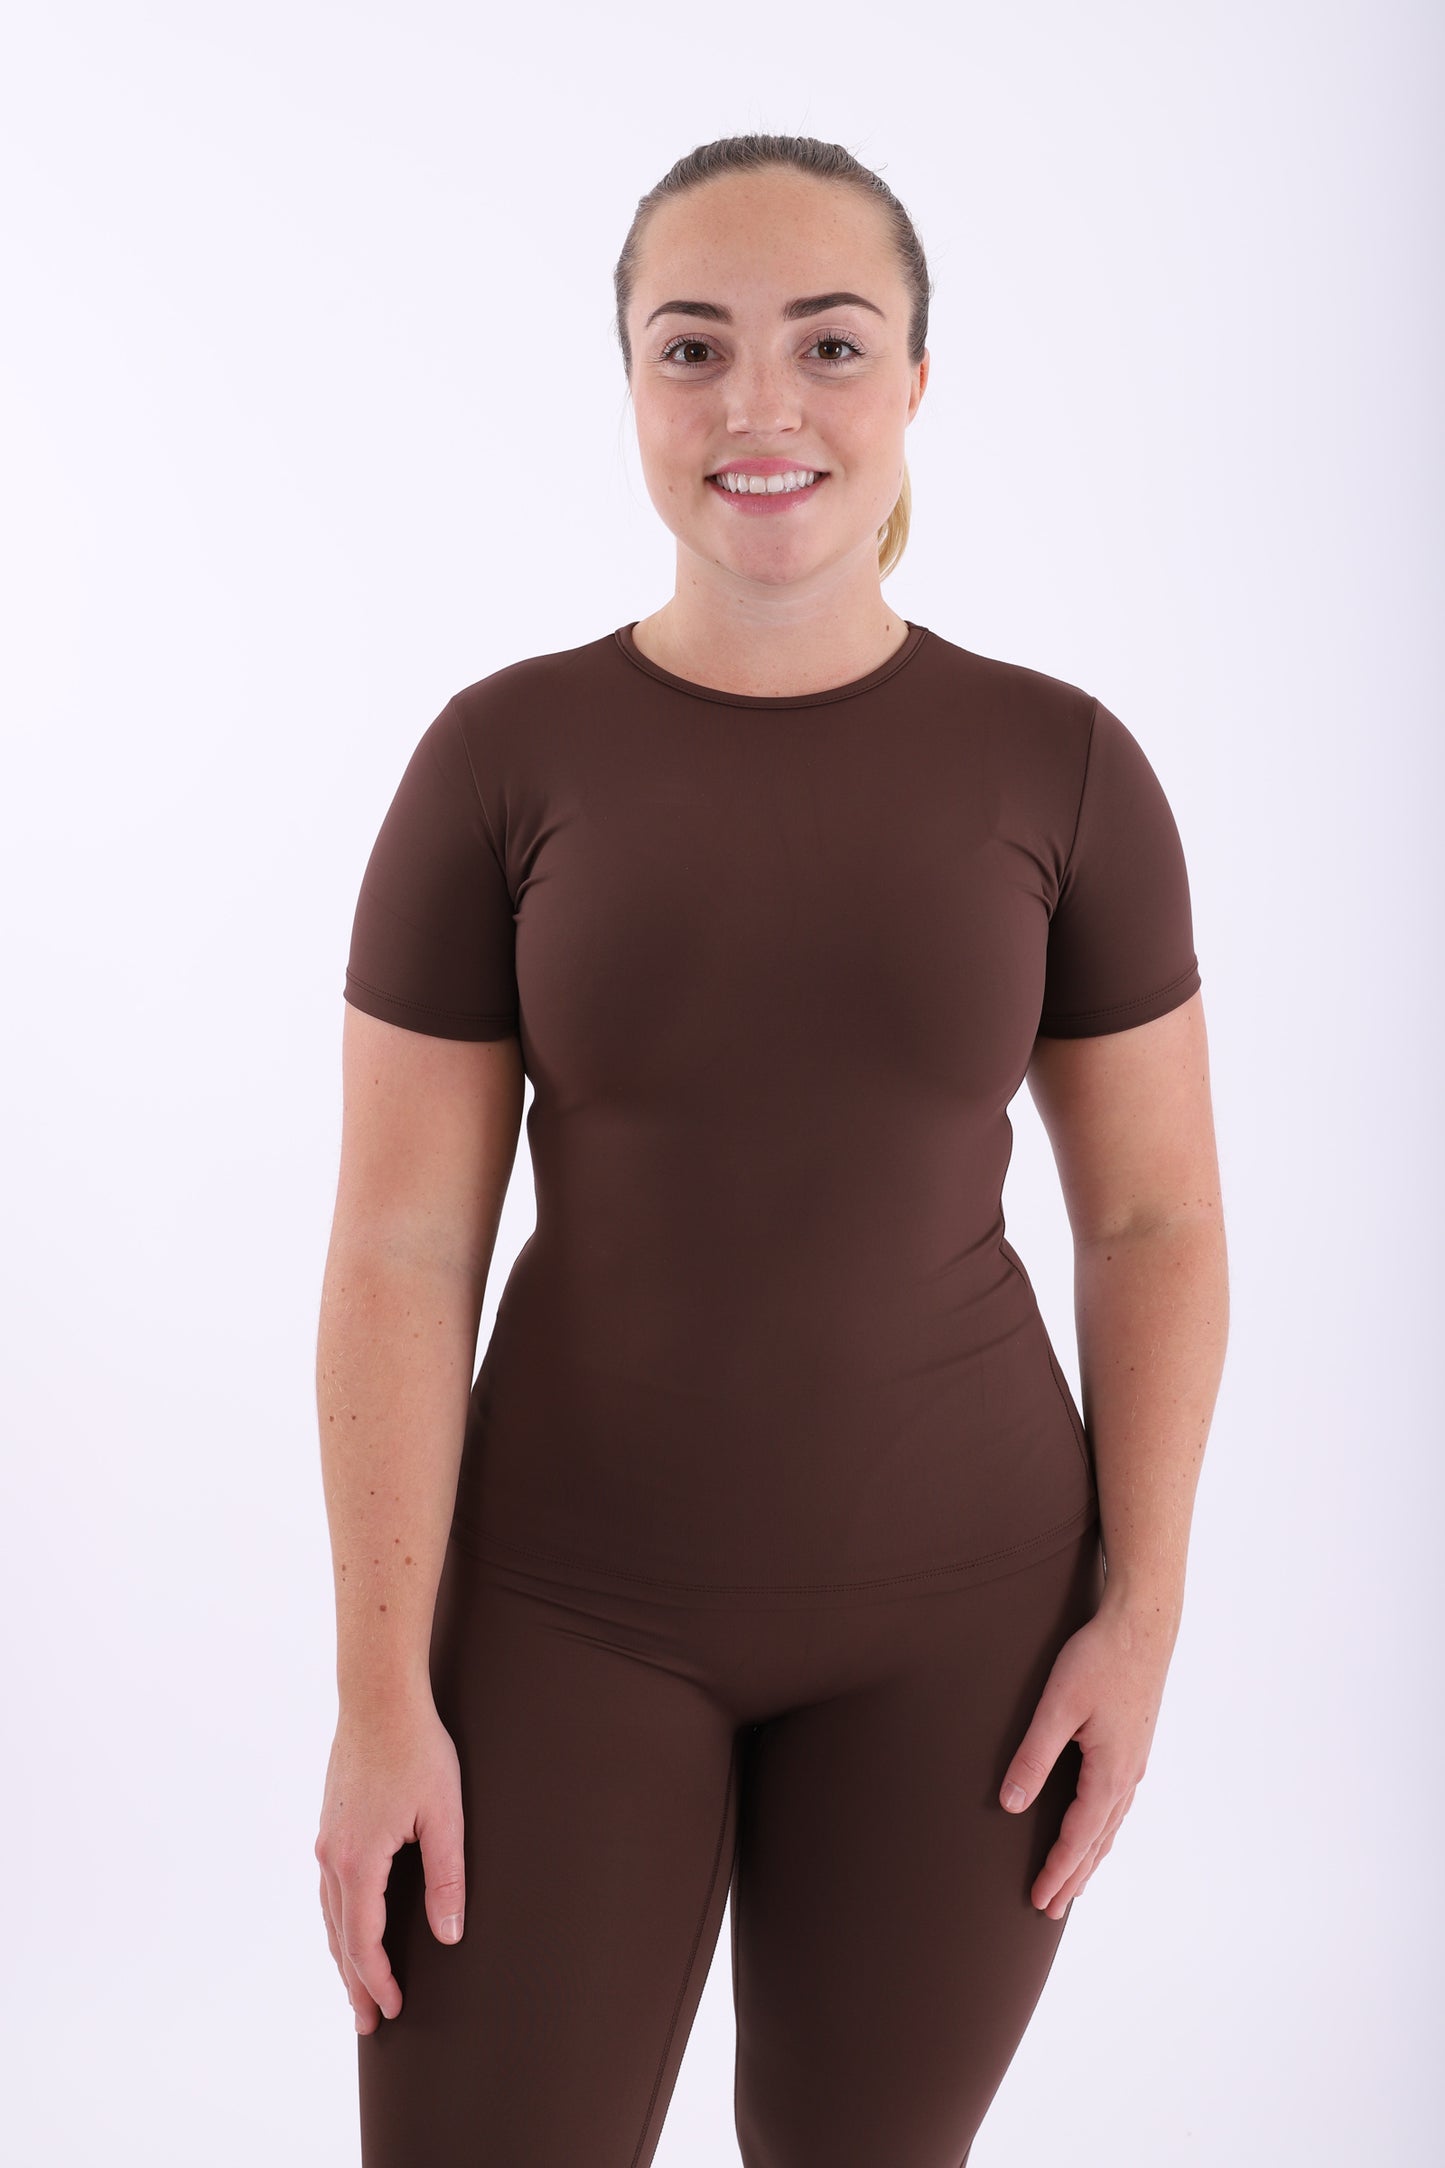 Chocolate brown smooth and sculpt top